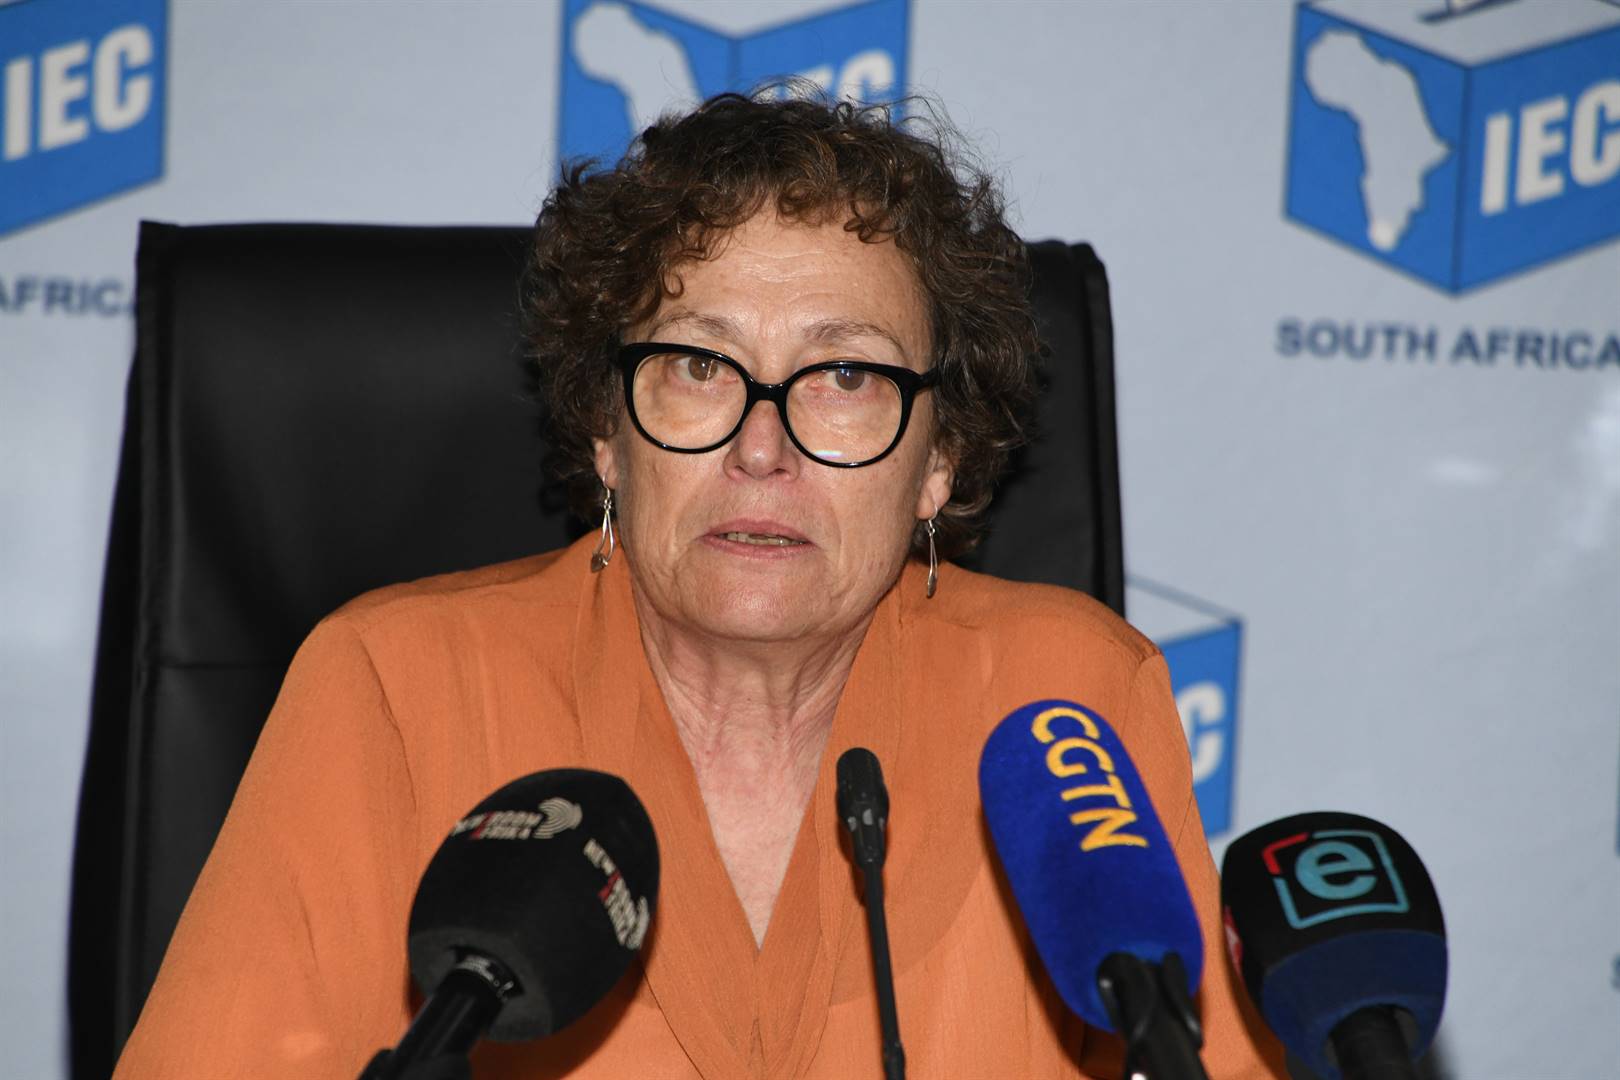 Electoral Commission of SA commissioner Janet Love is under fire for comments she made about Jacob Zuma's eligibility in January.